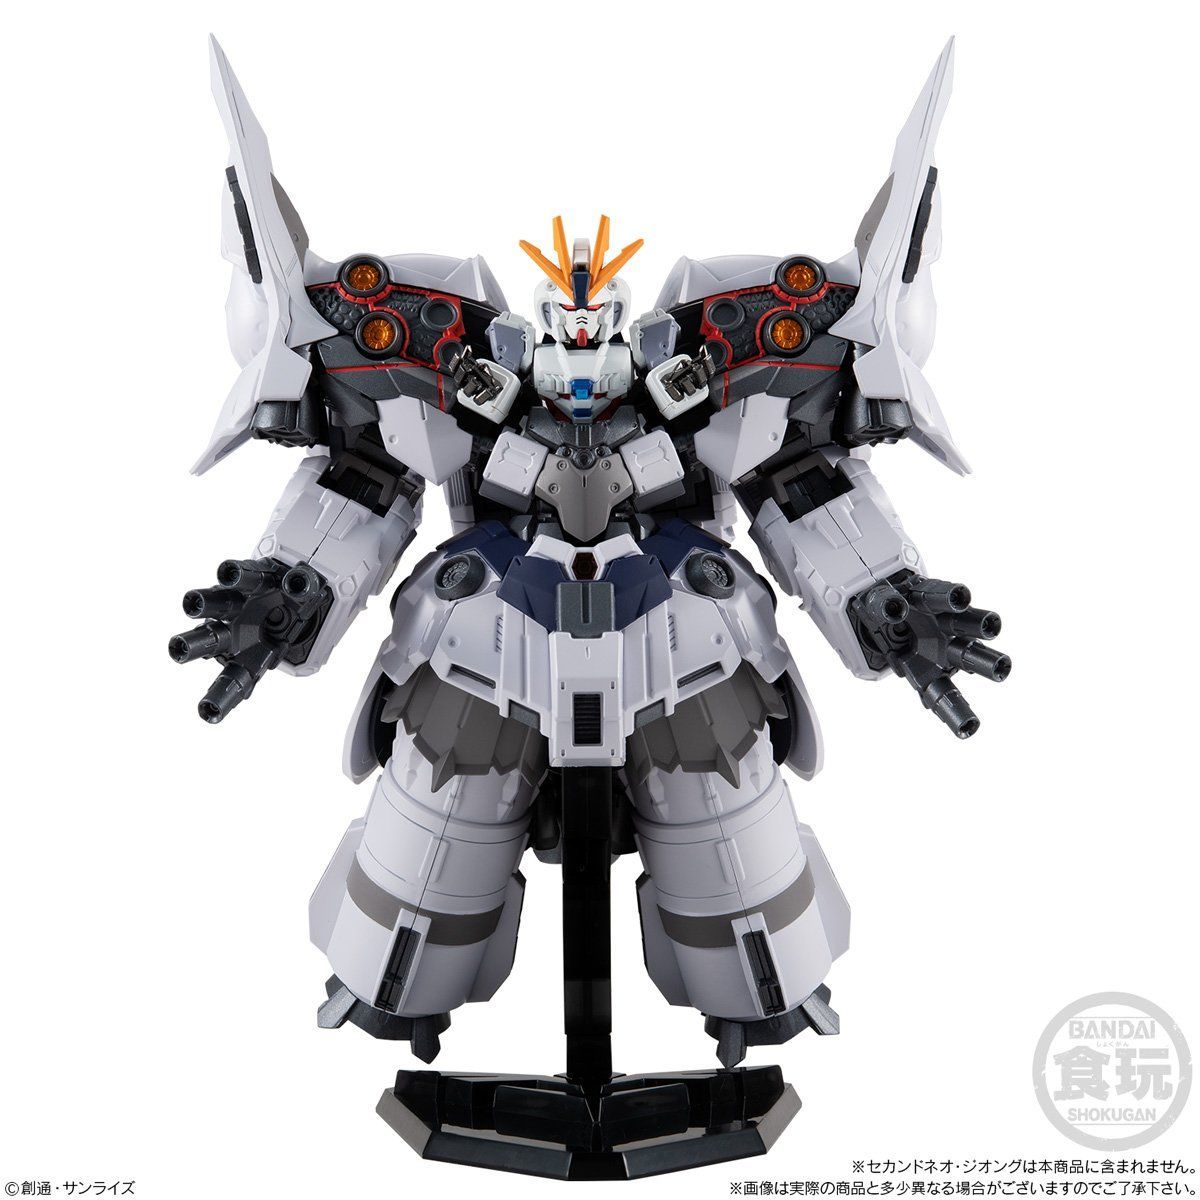 FW Gundam Converge Expansion Parts for NZ-999 Second Neo Zeong